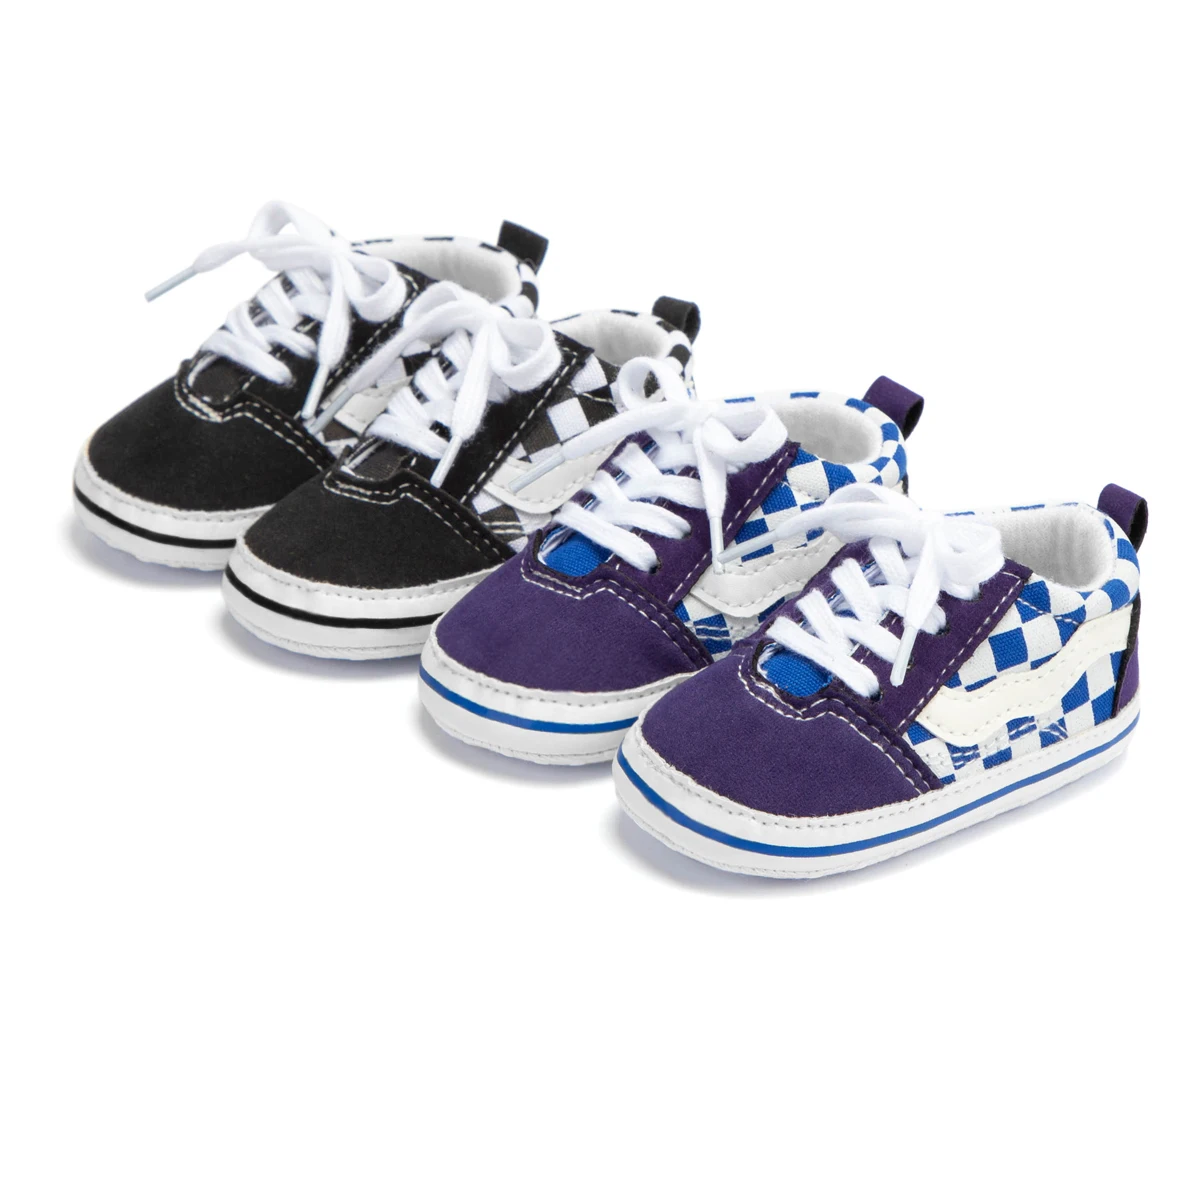 

2022 New design indoor baby all-season non-slip soft sole baby shoes plaid denim newborn baby sneakers, 11 color